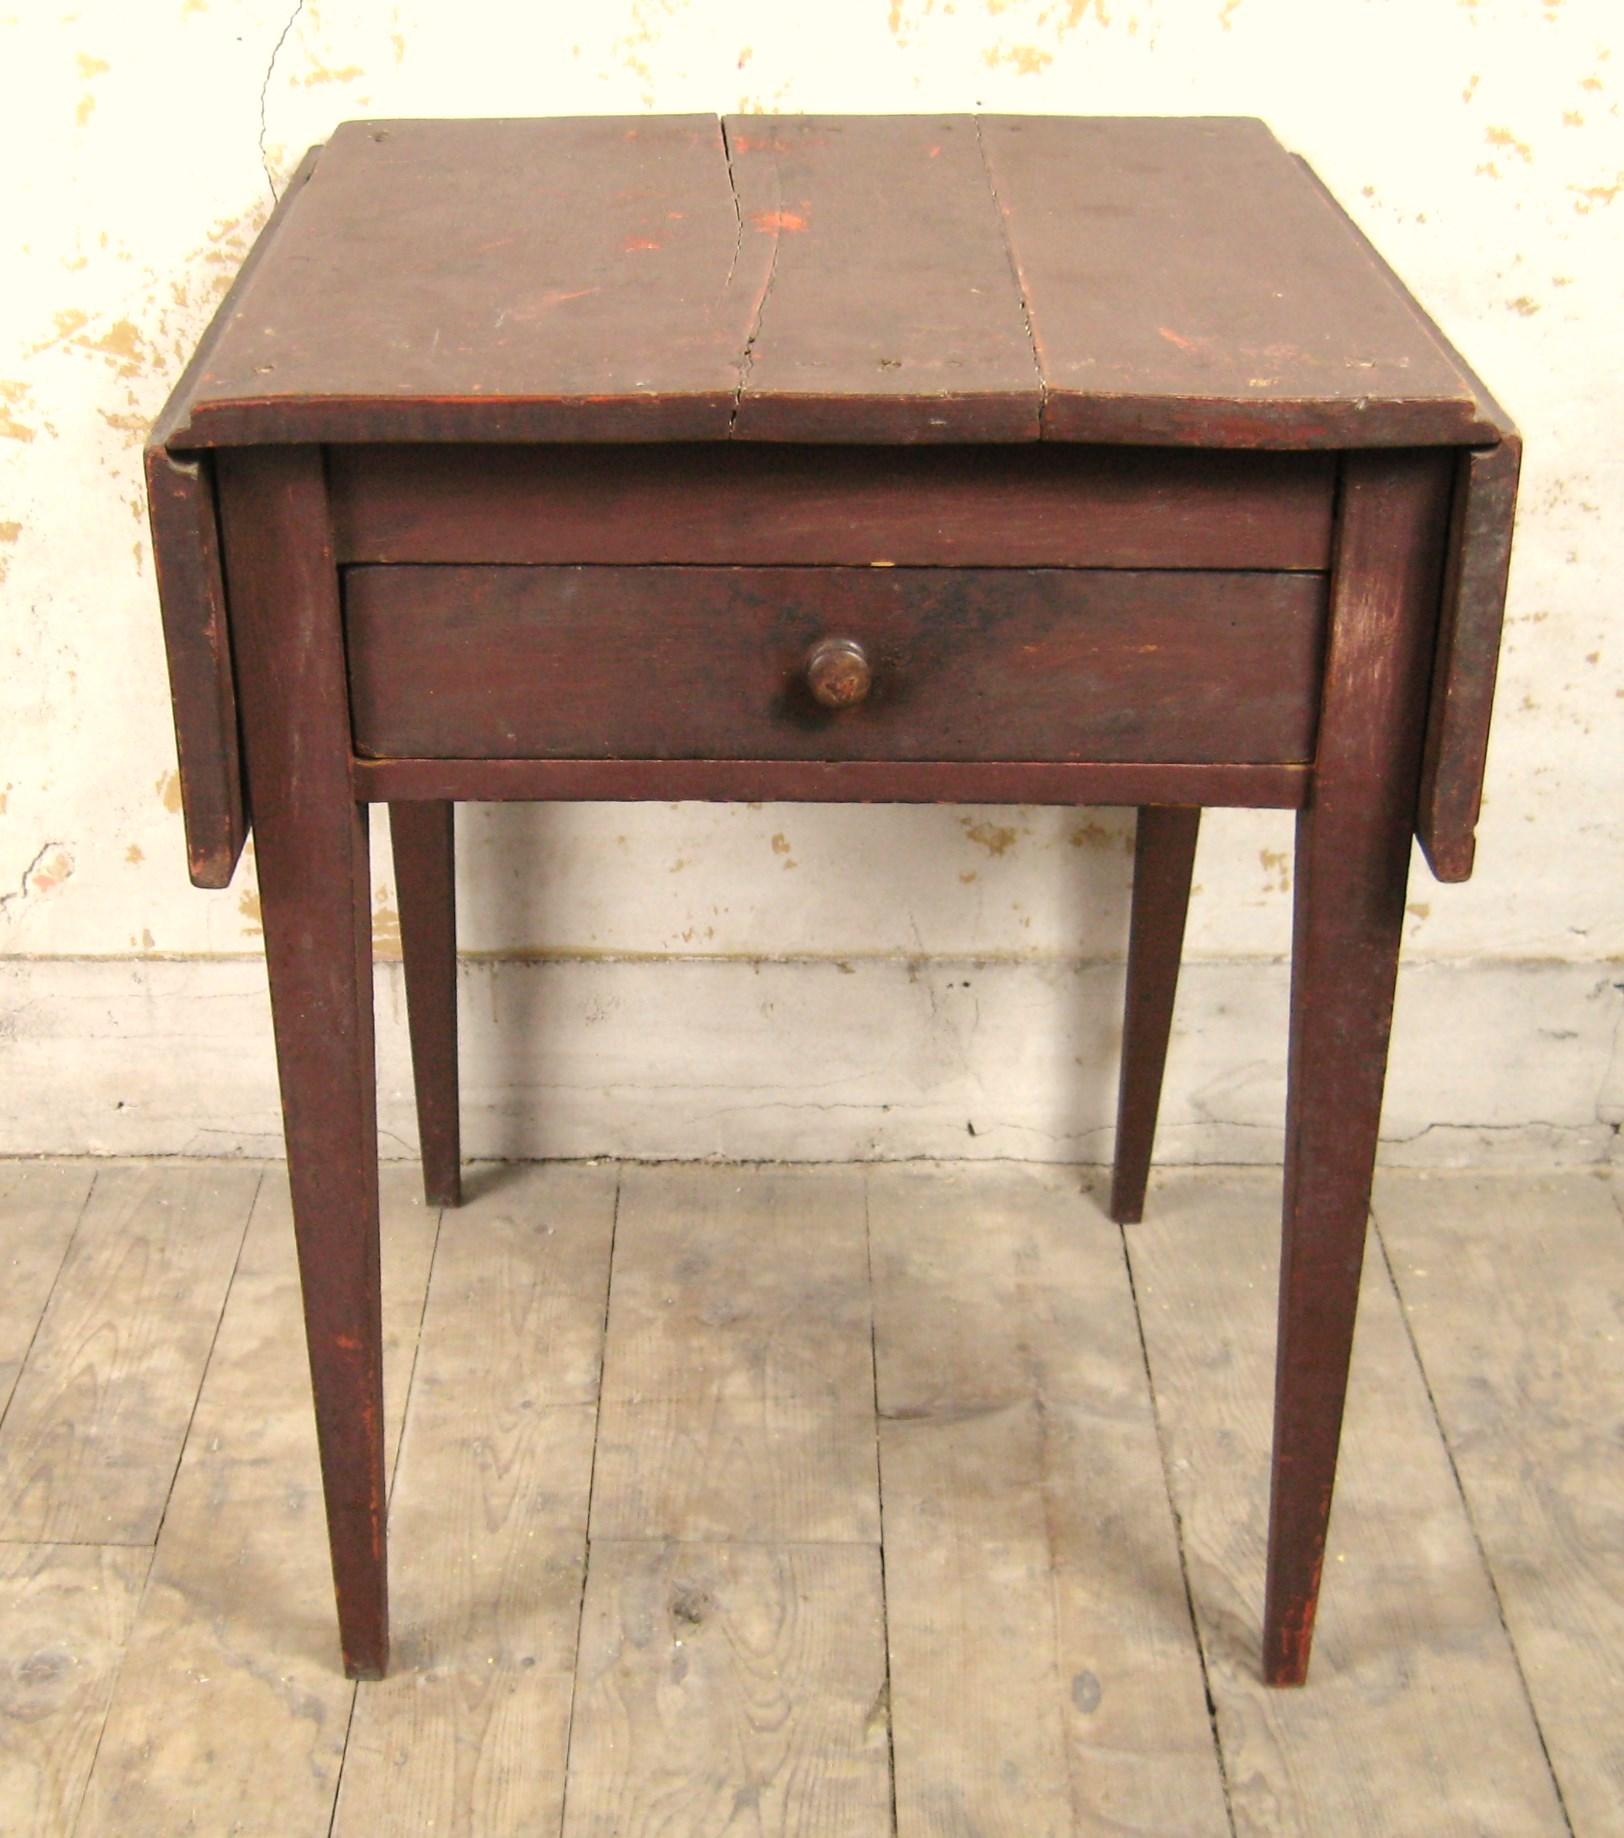 This Antique Primitive Farm work table is a rare find for collectors and enthusiasts of historical furniture. Its great redish color, country-style theme, and wood material make it a unique addition to any Farmhouse or home decor. Measuring 26.75